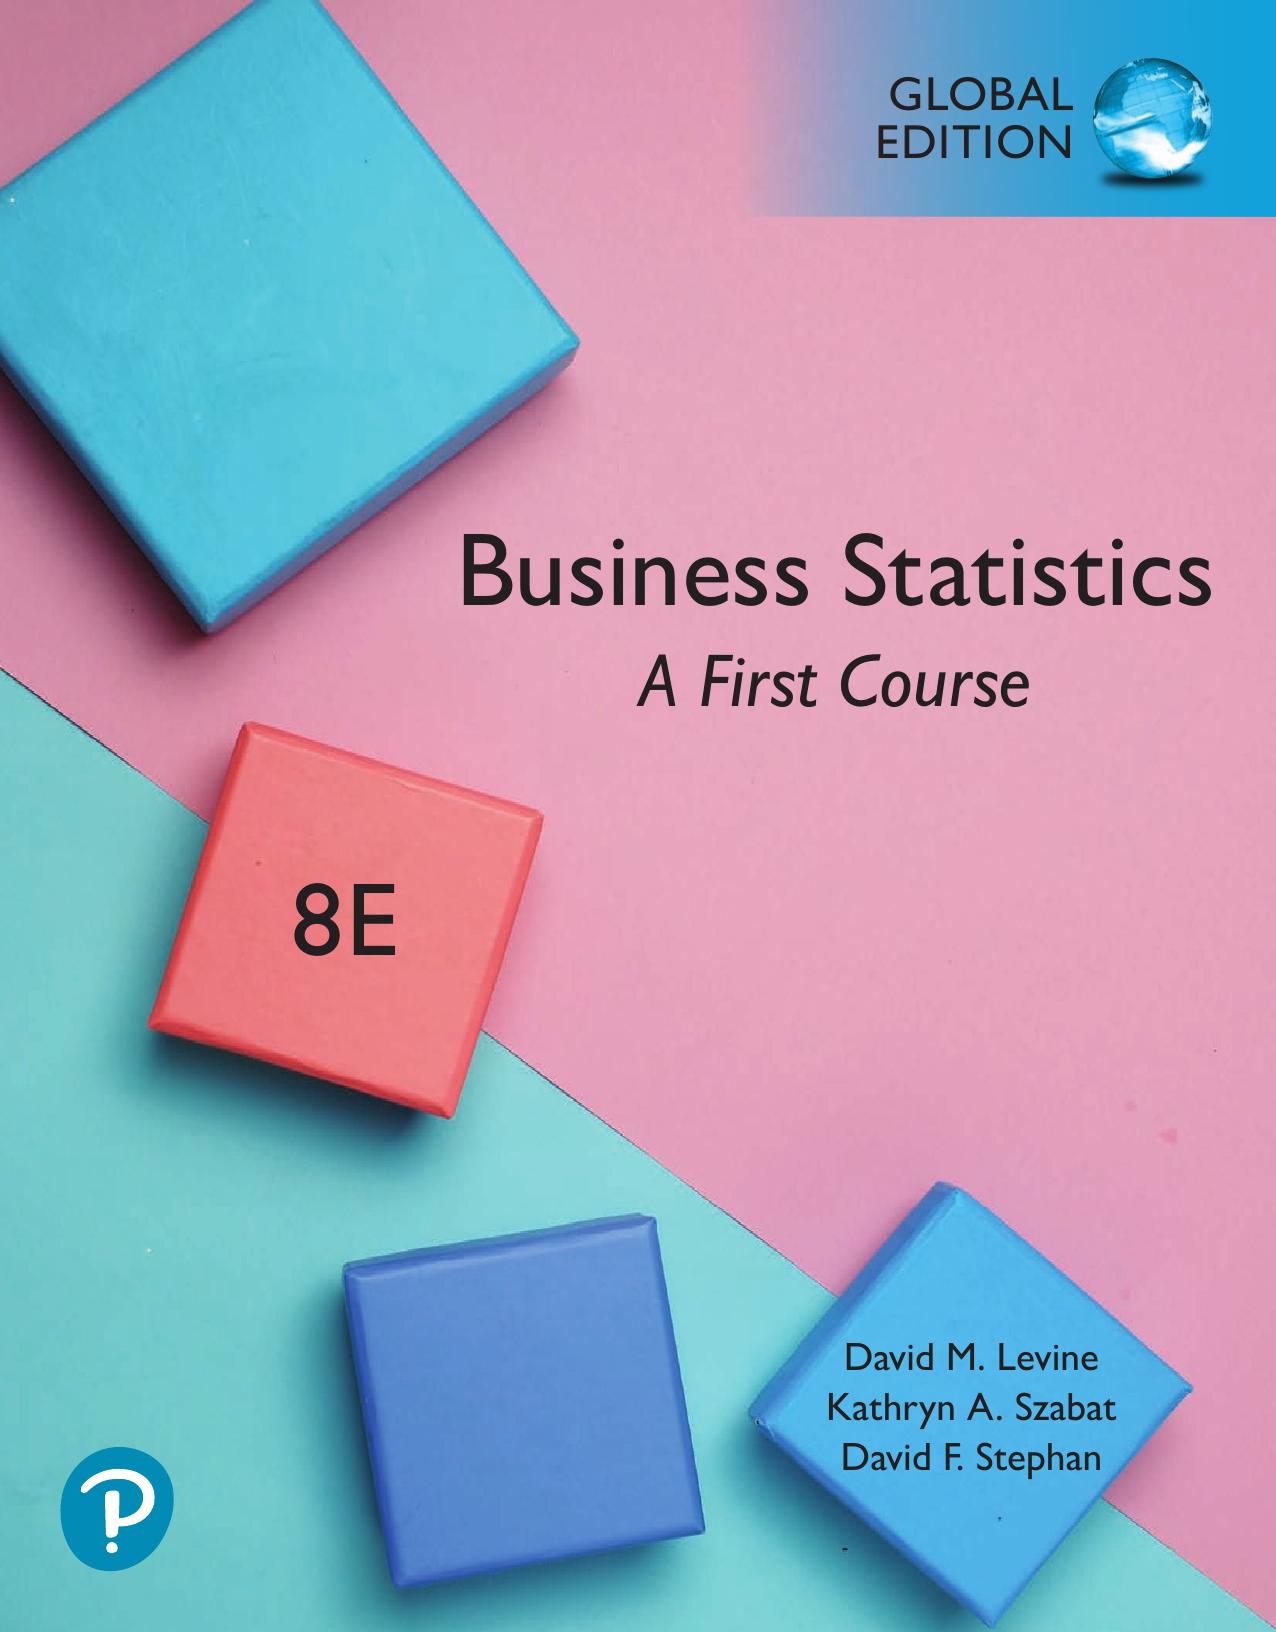 (Test Bank)Business Statistics: A First Course 8th Global Edition by David Levine,Kathryn Szabat